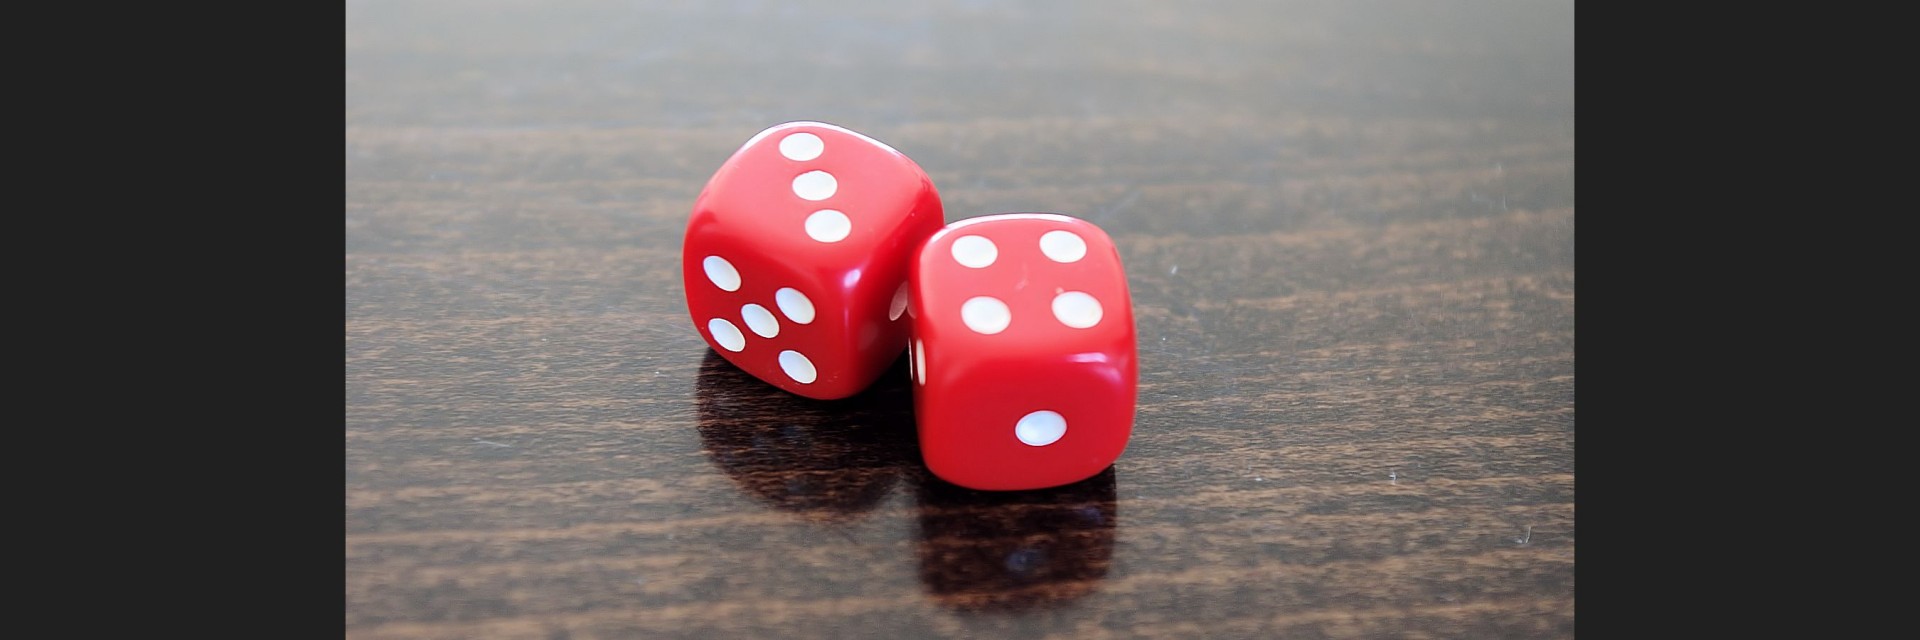 red dice game free photo